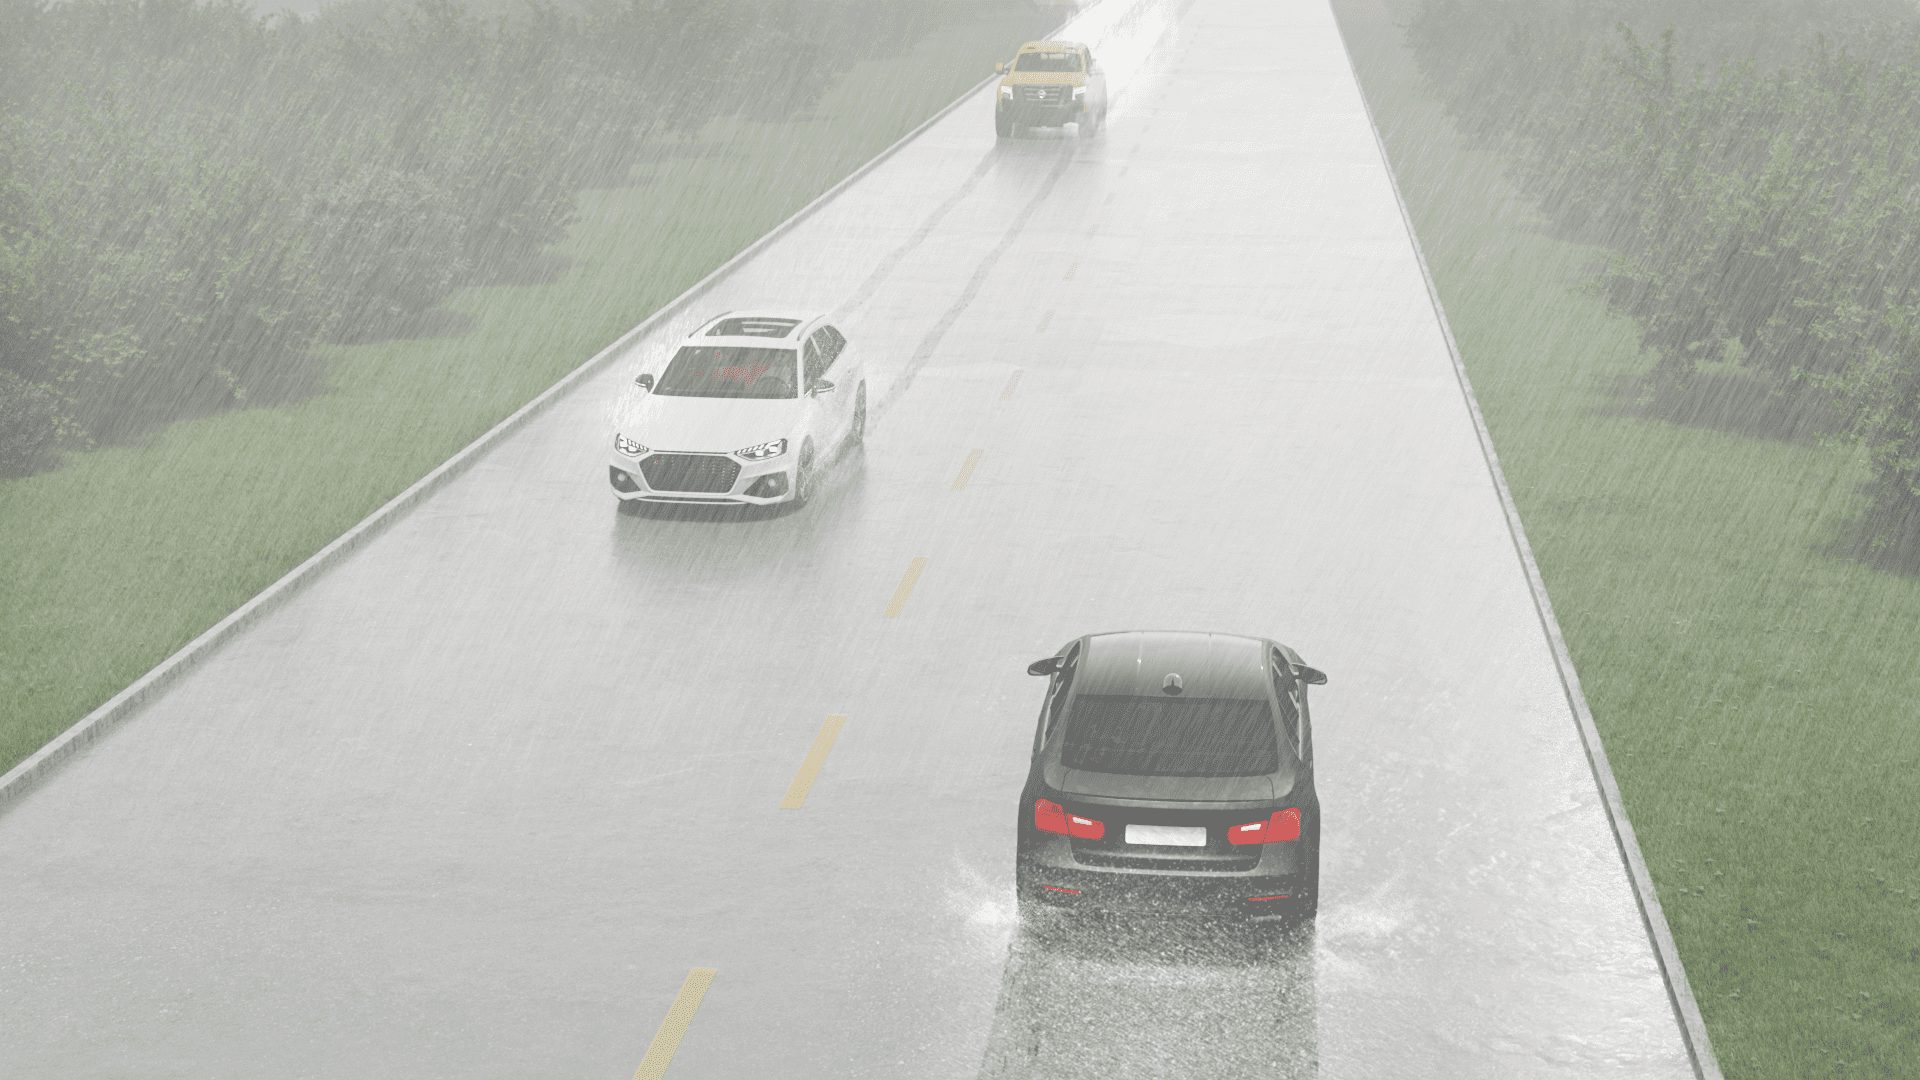 Vehicles traveling in opposite directions in the rain